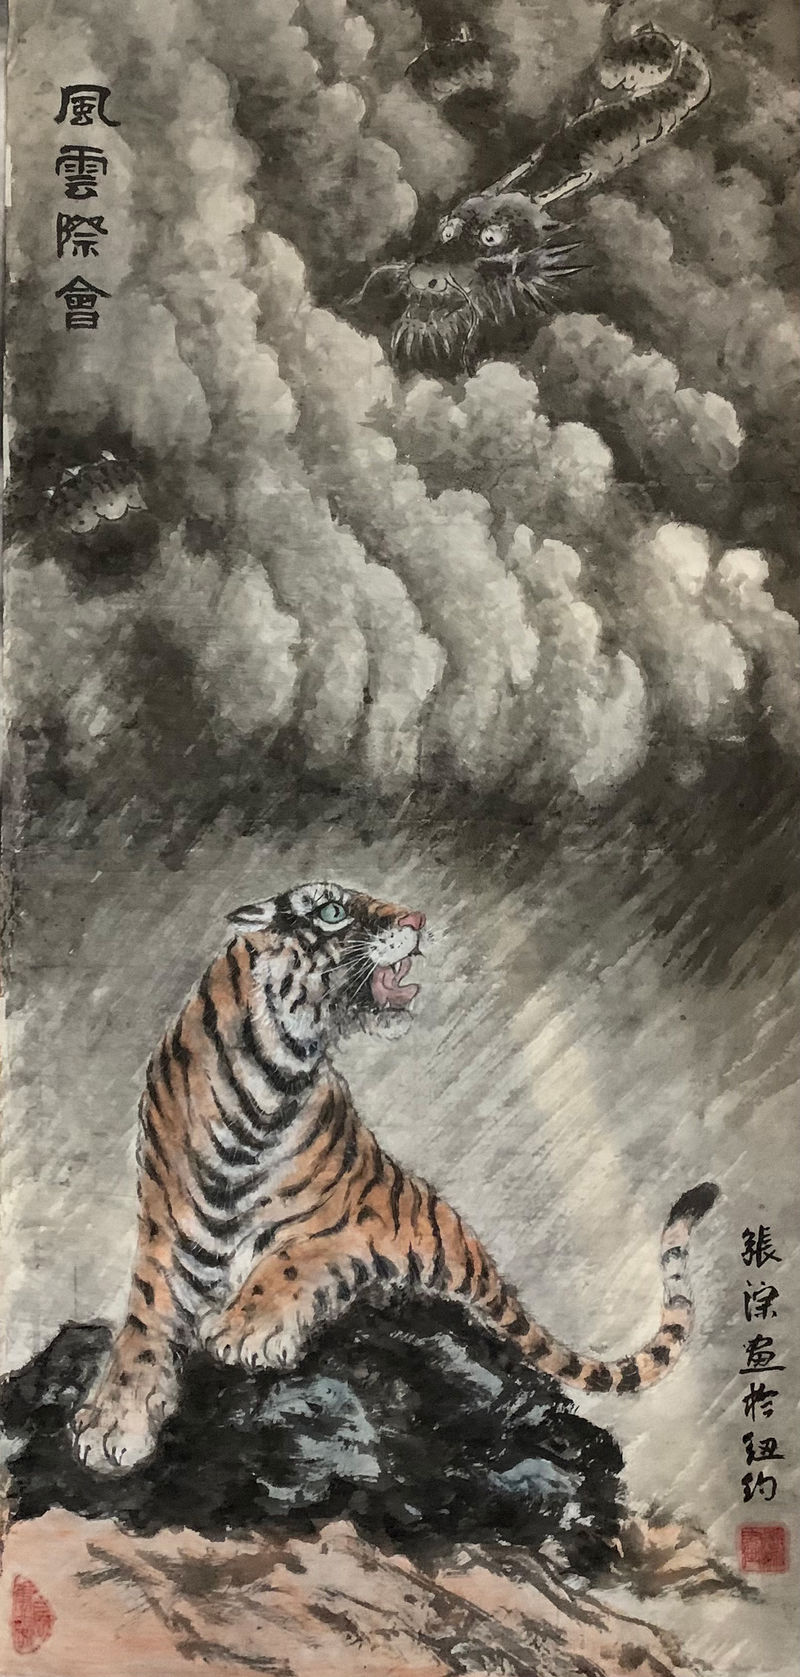 A painting of a tiger roaring at a dragoon in a cloud